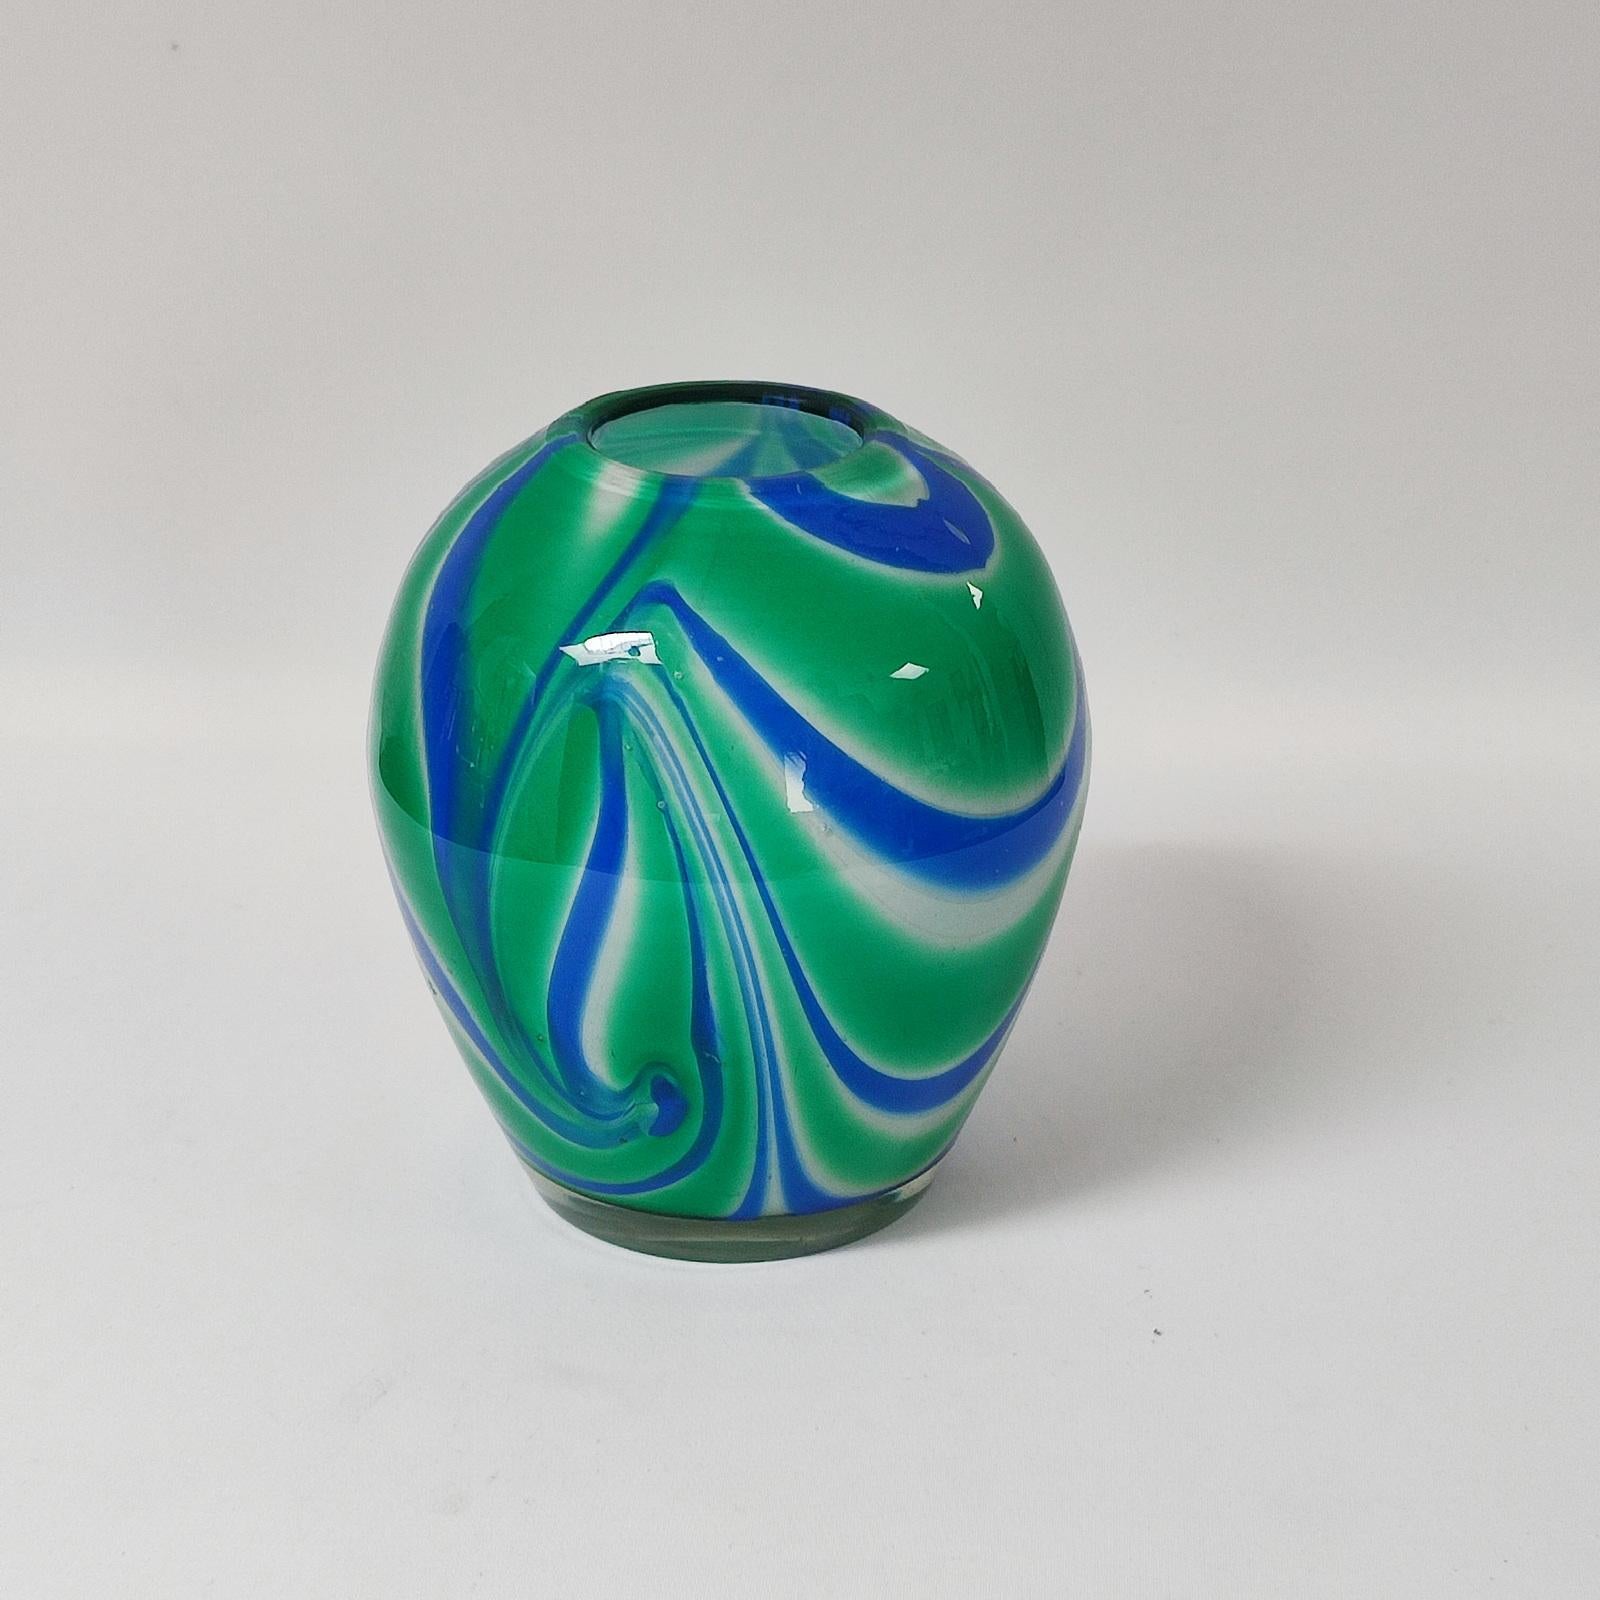 Late 20th Century Blue, Green & White Murano Glass Vase by Carlo Moretti, Italy 1990s For Sale